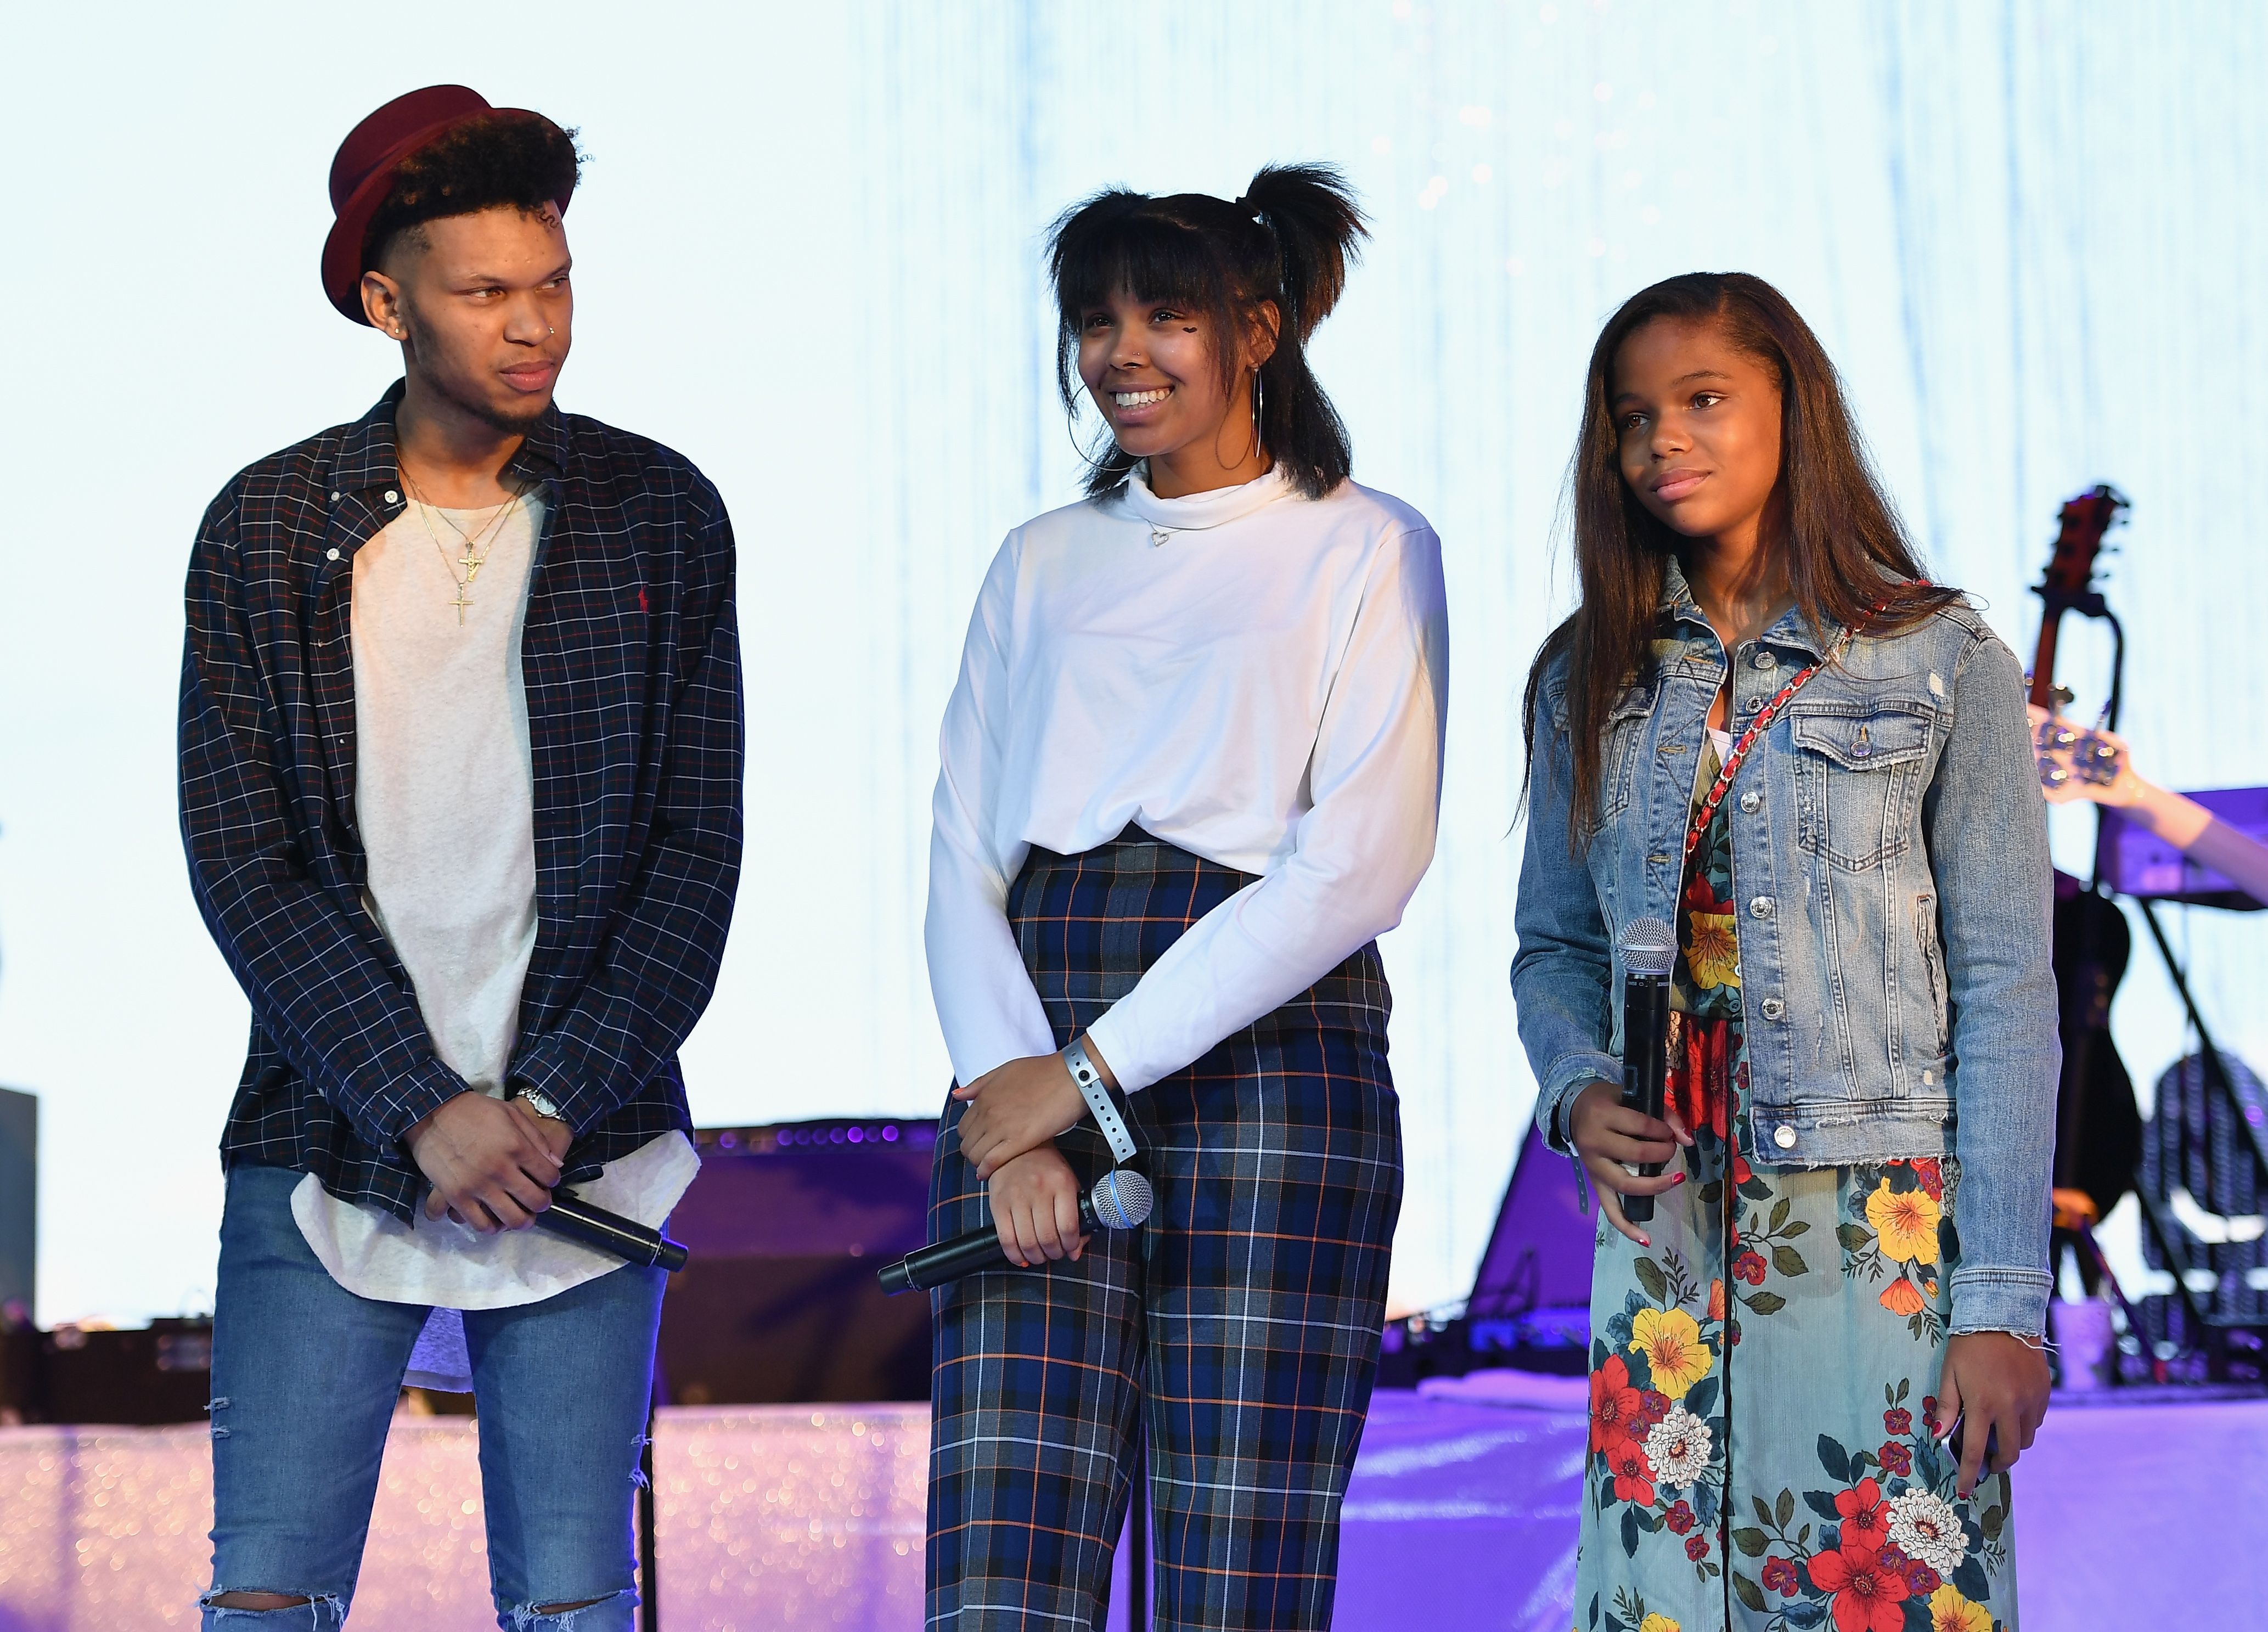 Grandchildren of Aretha Franklin, Jonah, Victorie and Gracie on stage at the "A People's Tribute to the Queen" event on August 30, 2018 in Detroit, Michigan | Source: Getty Images